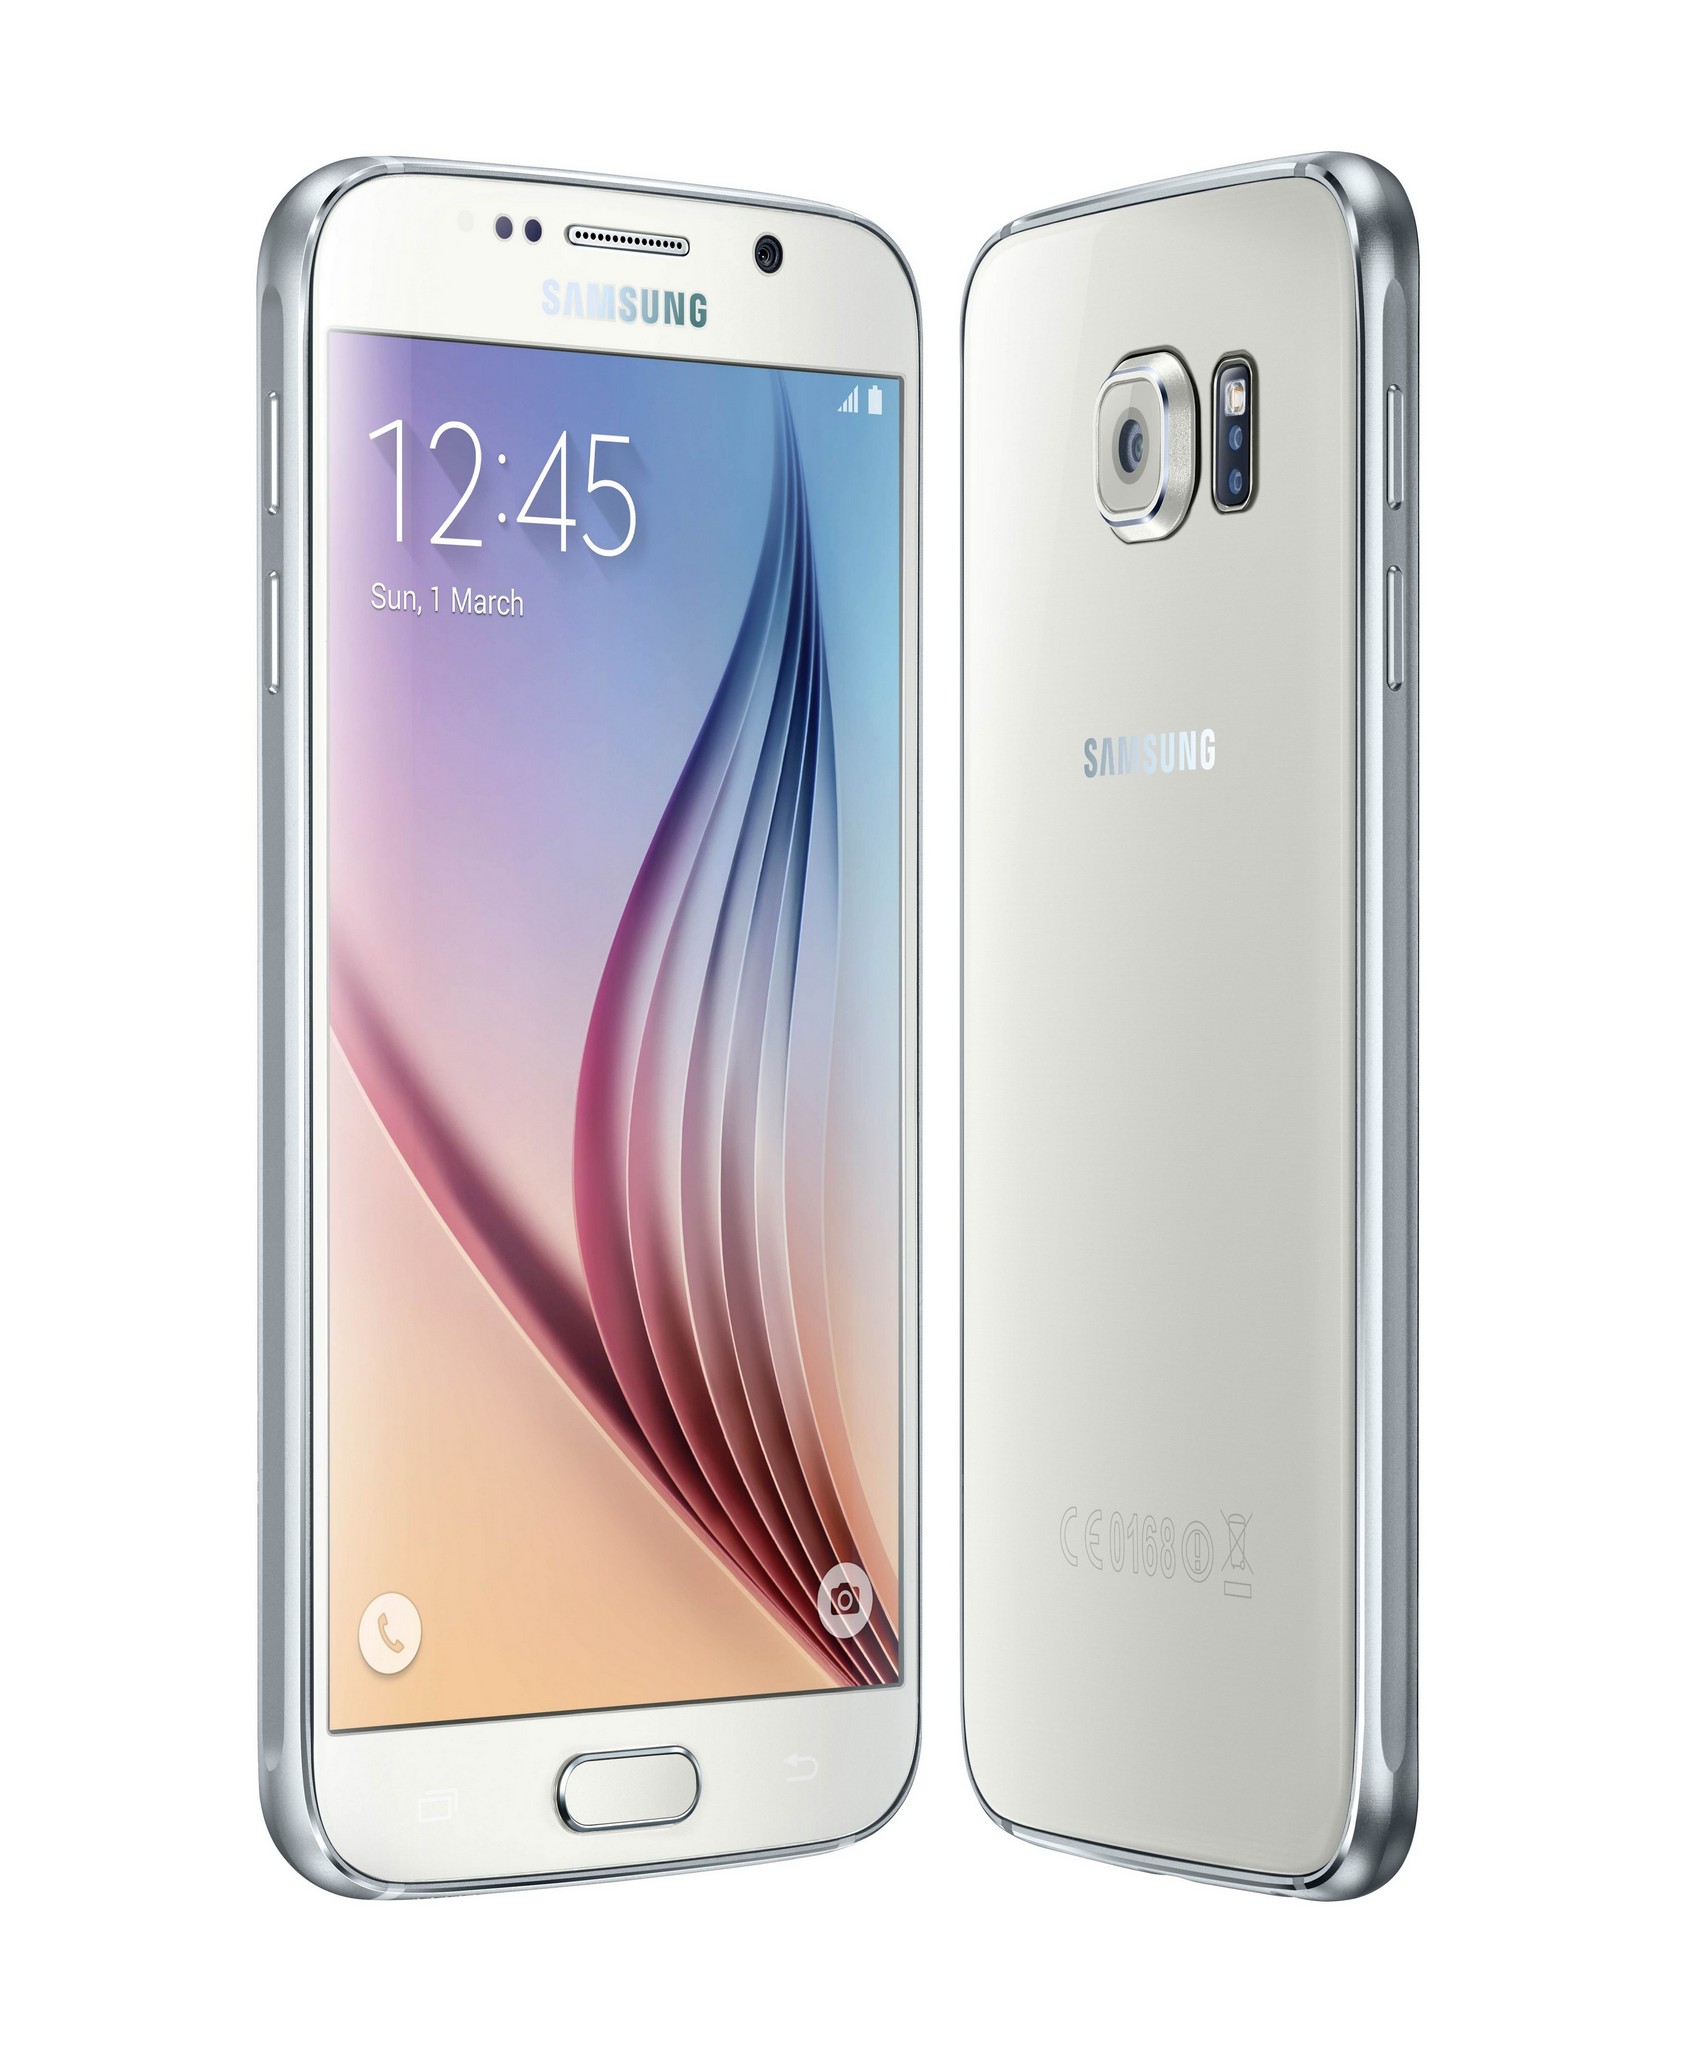 Galaxy-S6-and-S6-edge-frames-and-manufacturing-process (8)